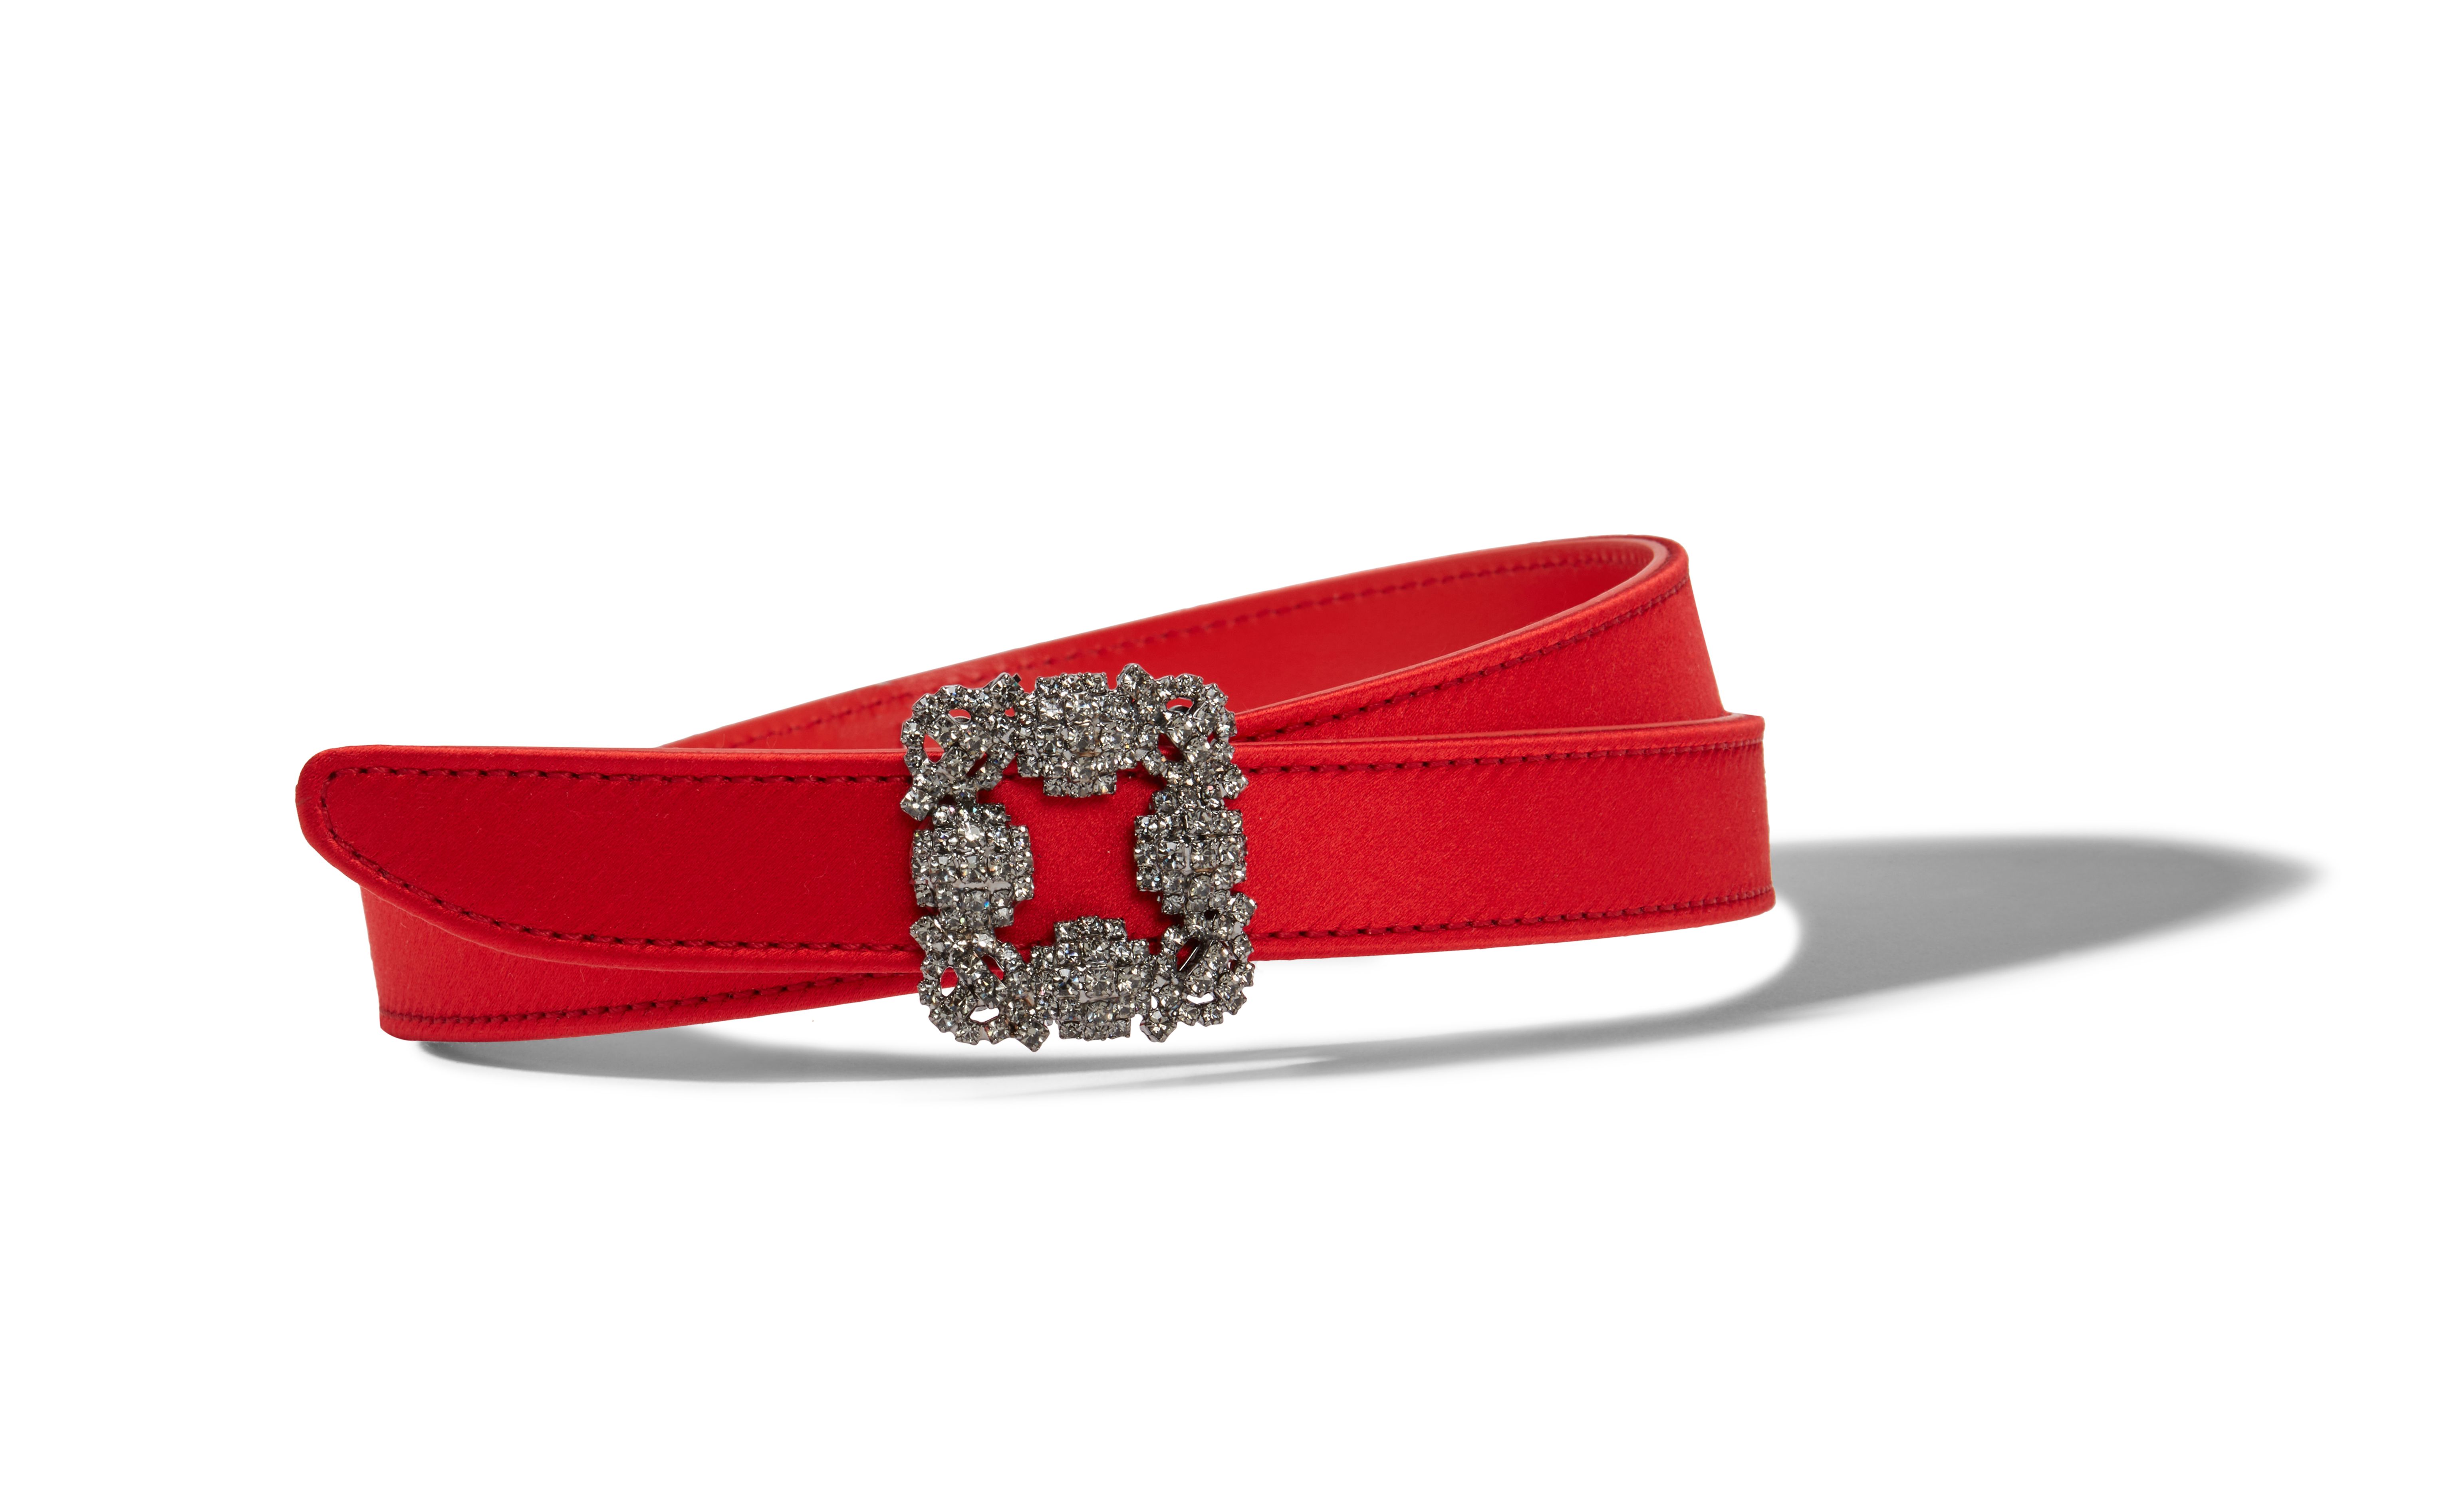 LADIES/WOMENS RED NAPPA LEATHER BELT